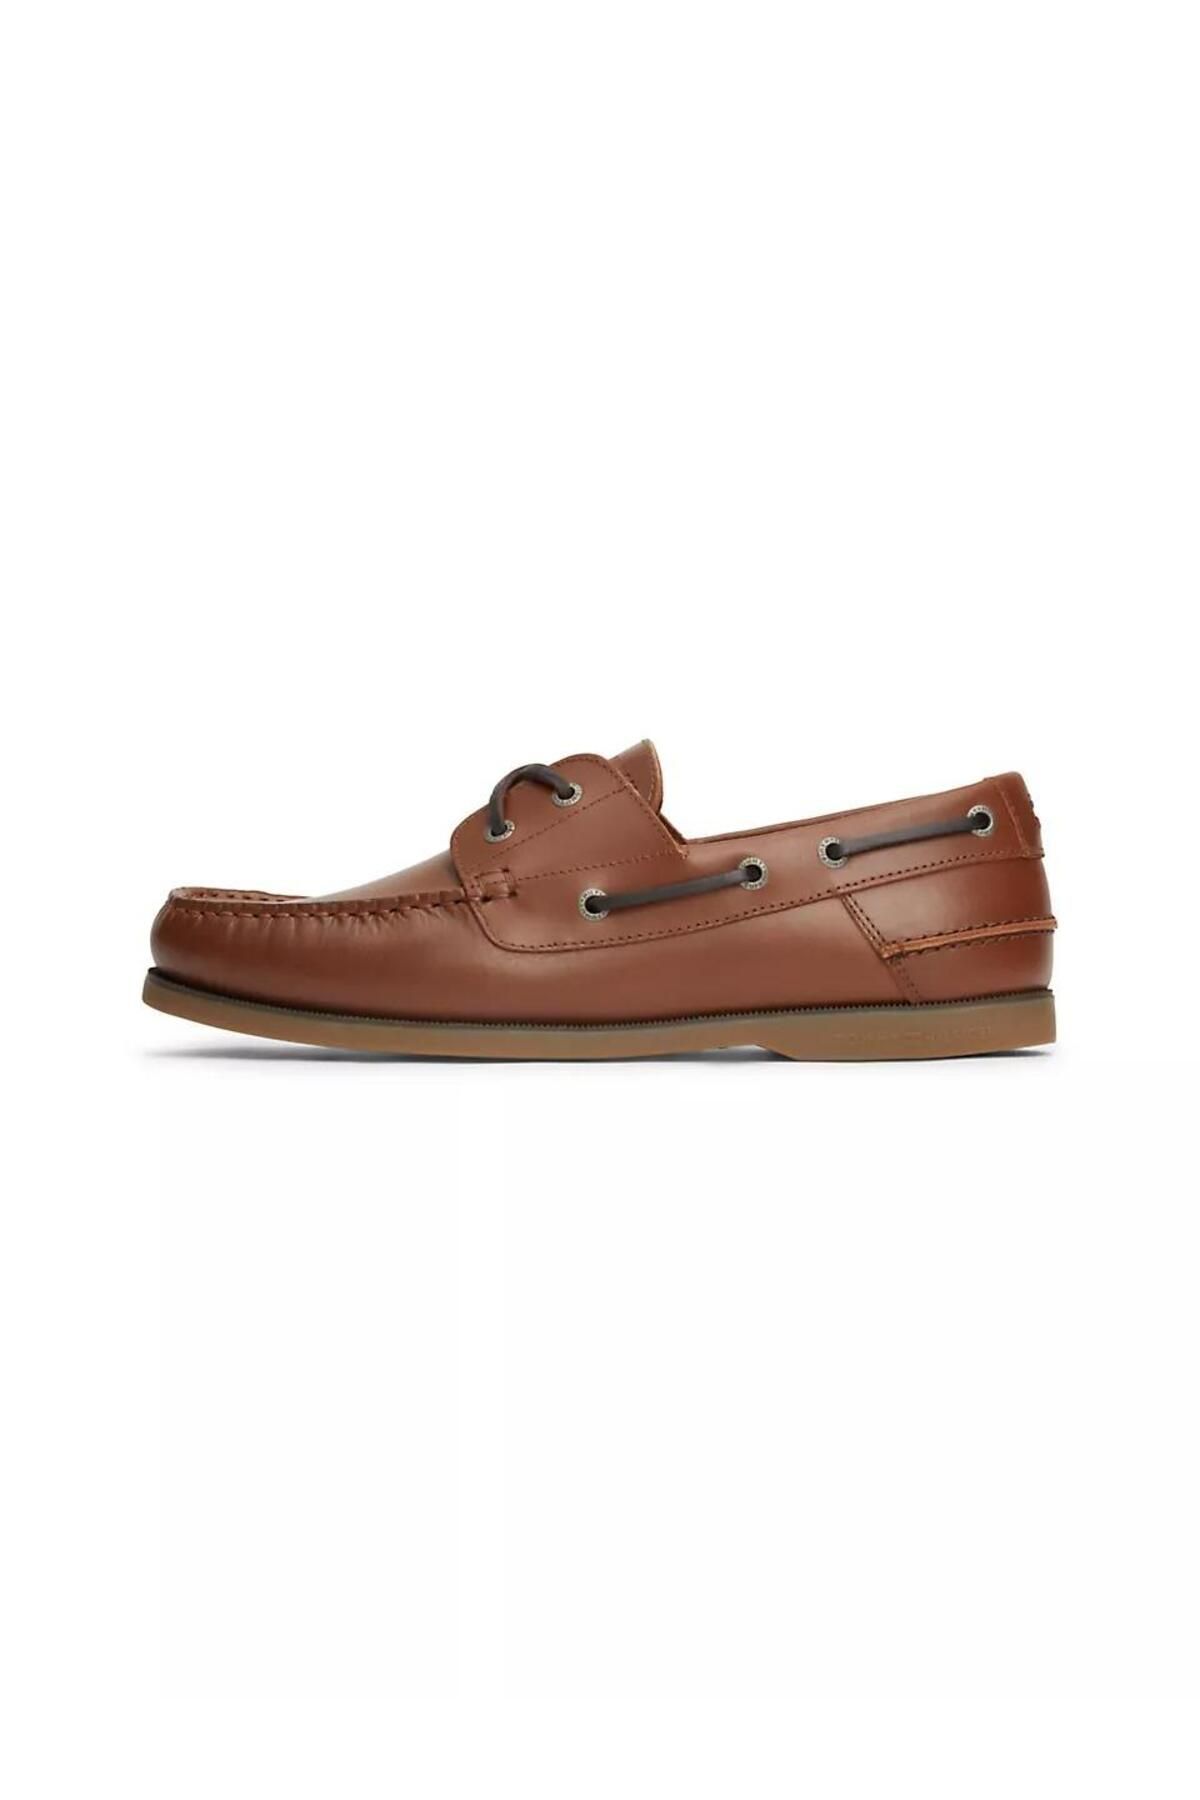 Tommy Hilfiger TH BOAT SHOE CORE LEATHER